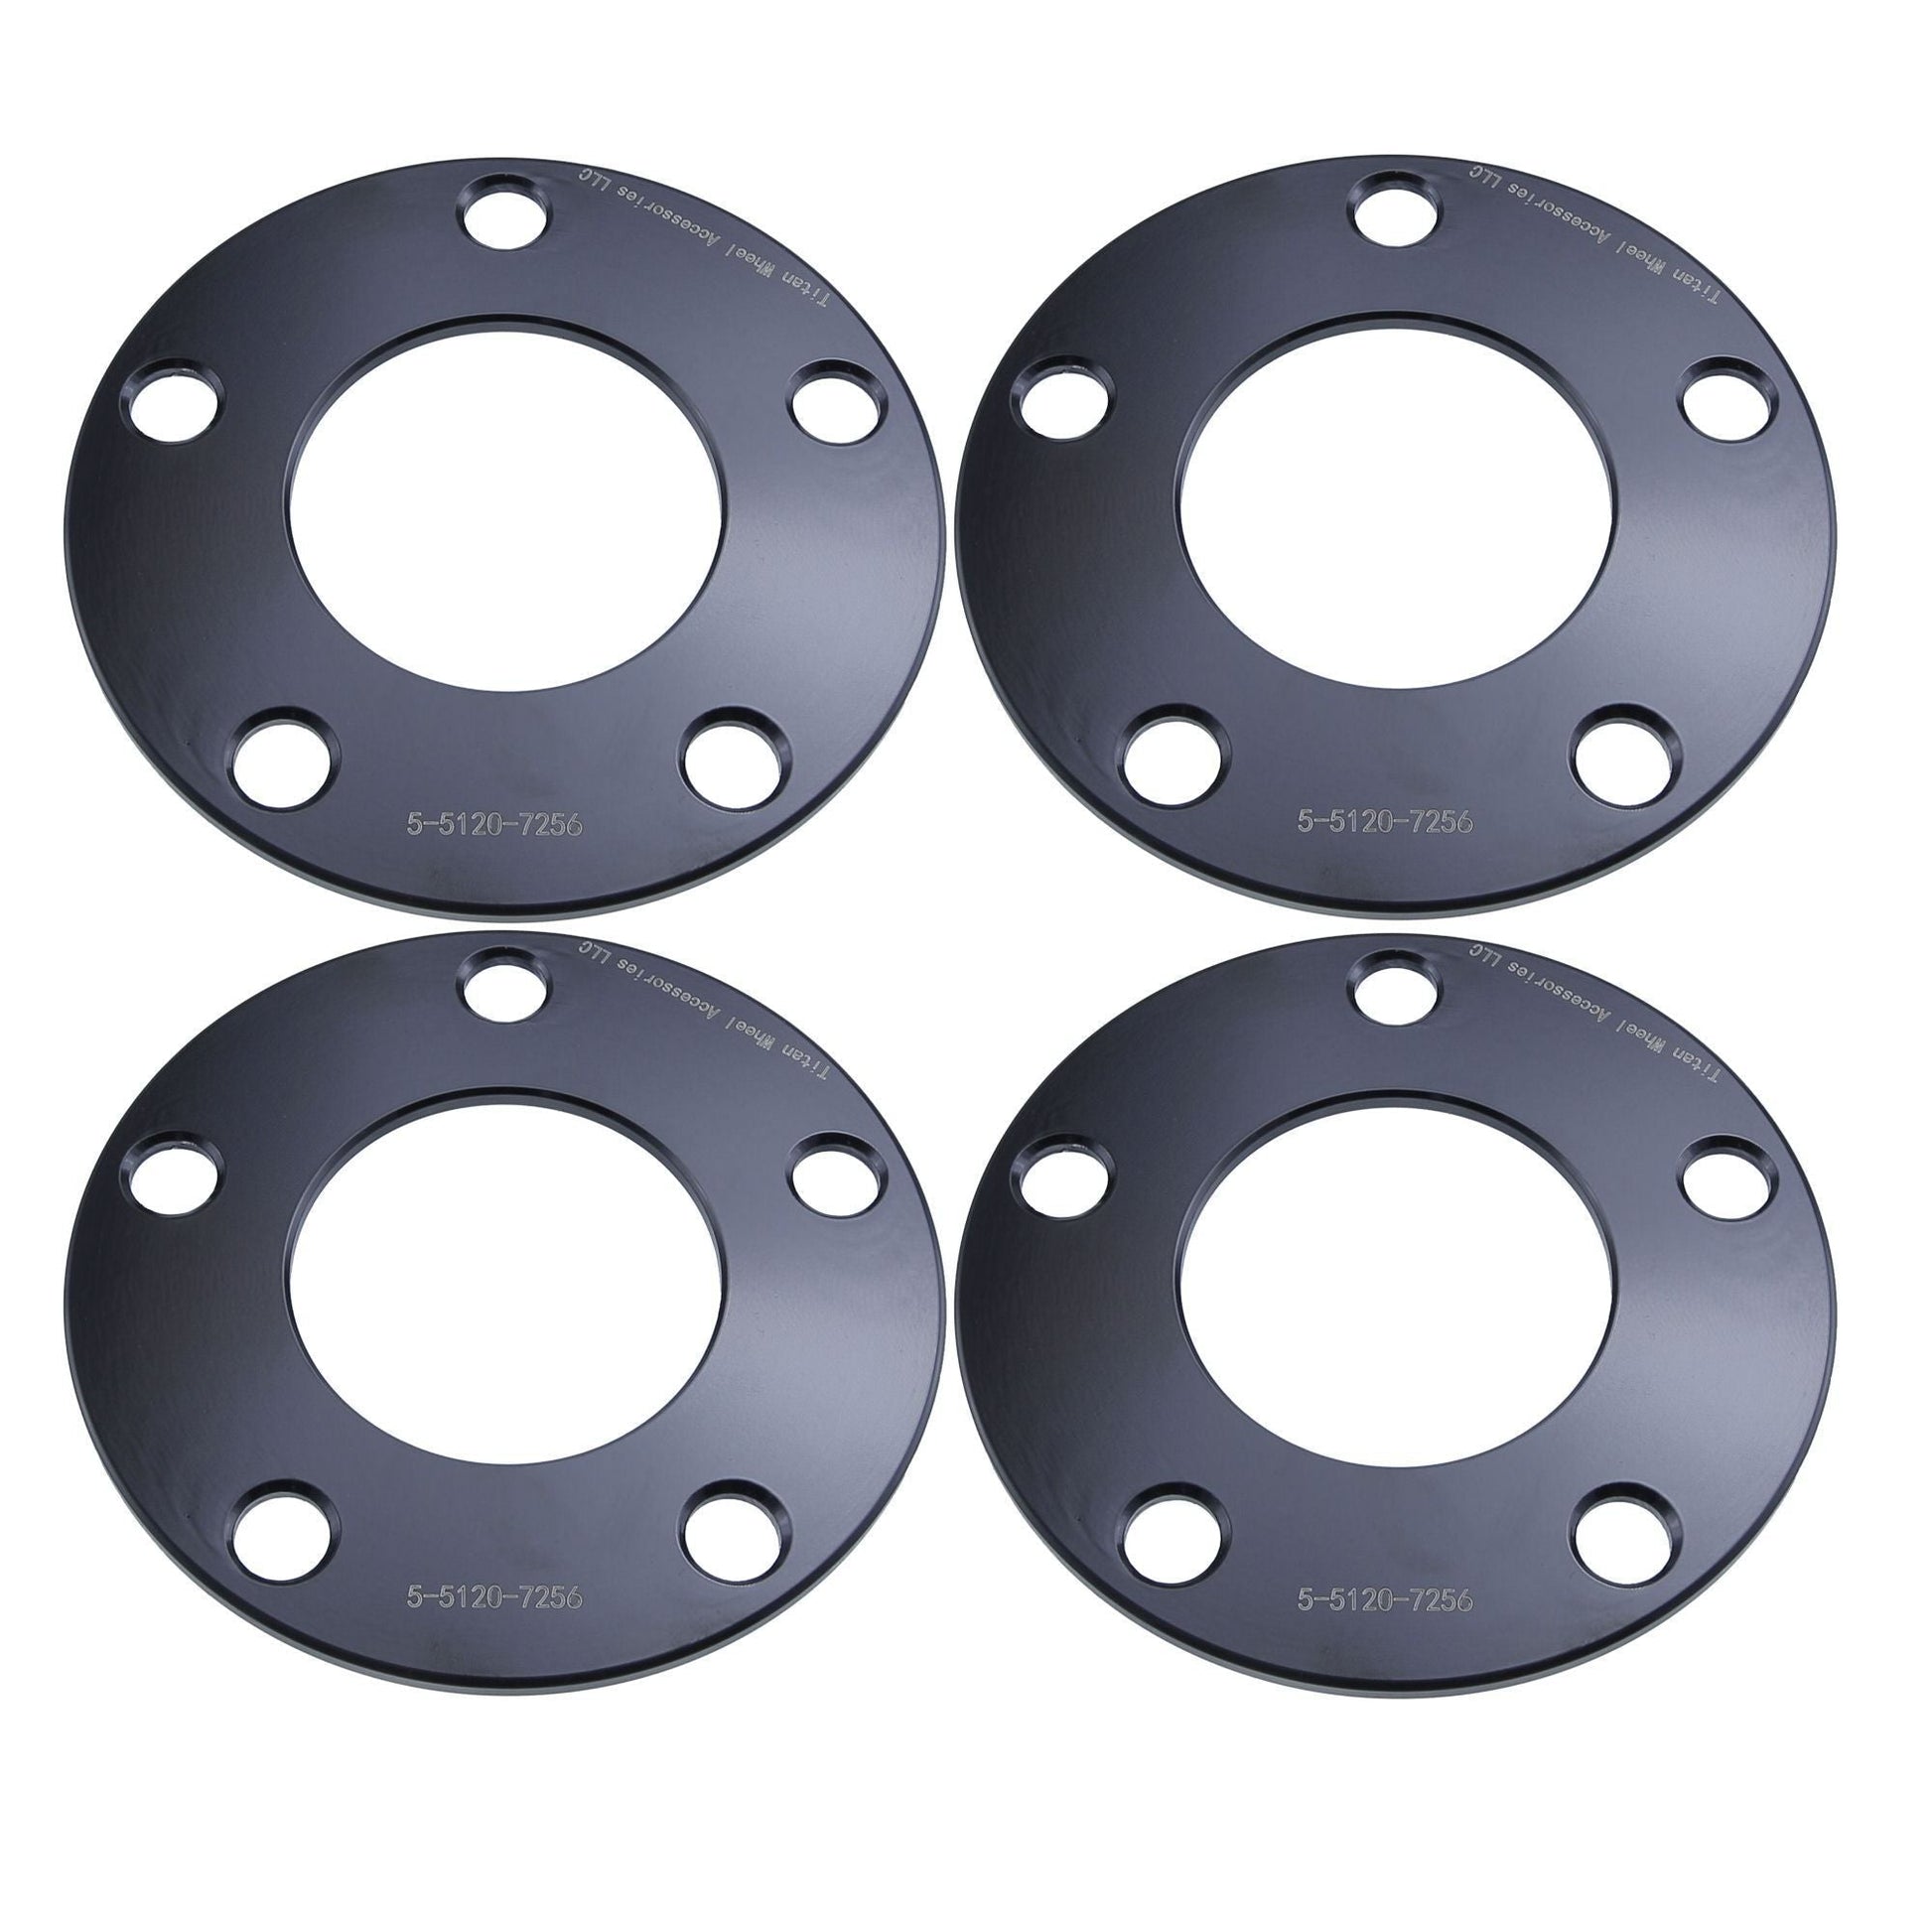 5mm Titan Wheel Spacers for BMW 1 3 5 6 7 Series | 5x120 | 72.56 Hubcentric | Set of 4 | Titan Wheel Accessories